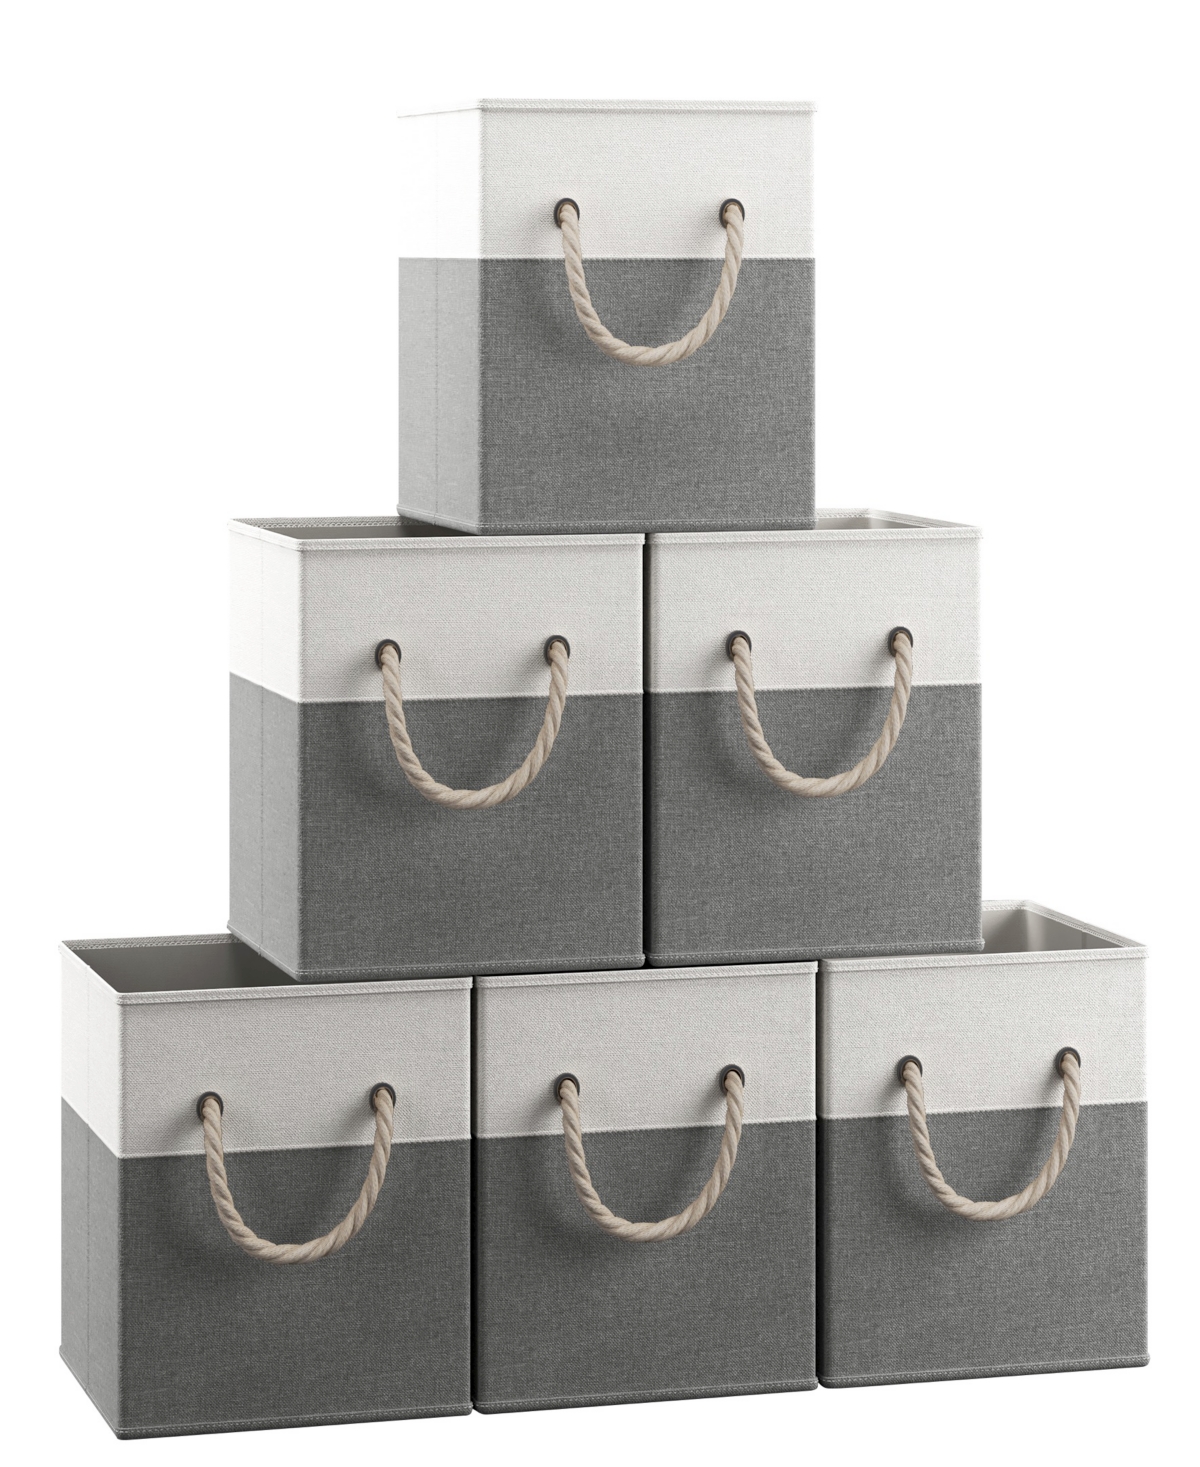 Ornavo Home Foldable Linen Storage Cube Bin With Rope Handles In White,gray